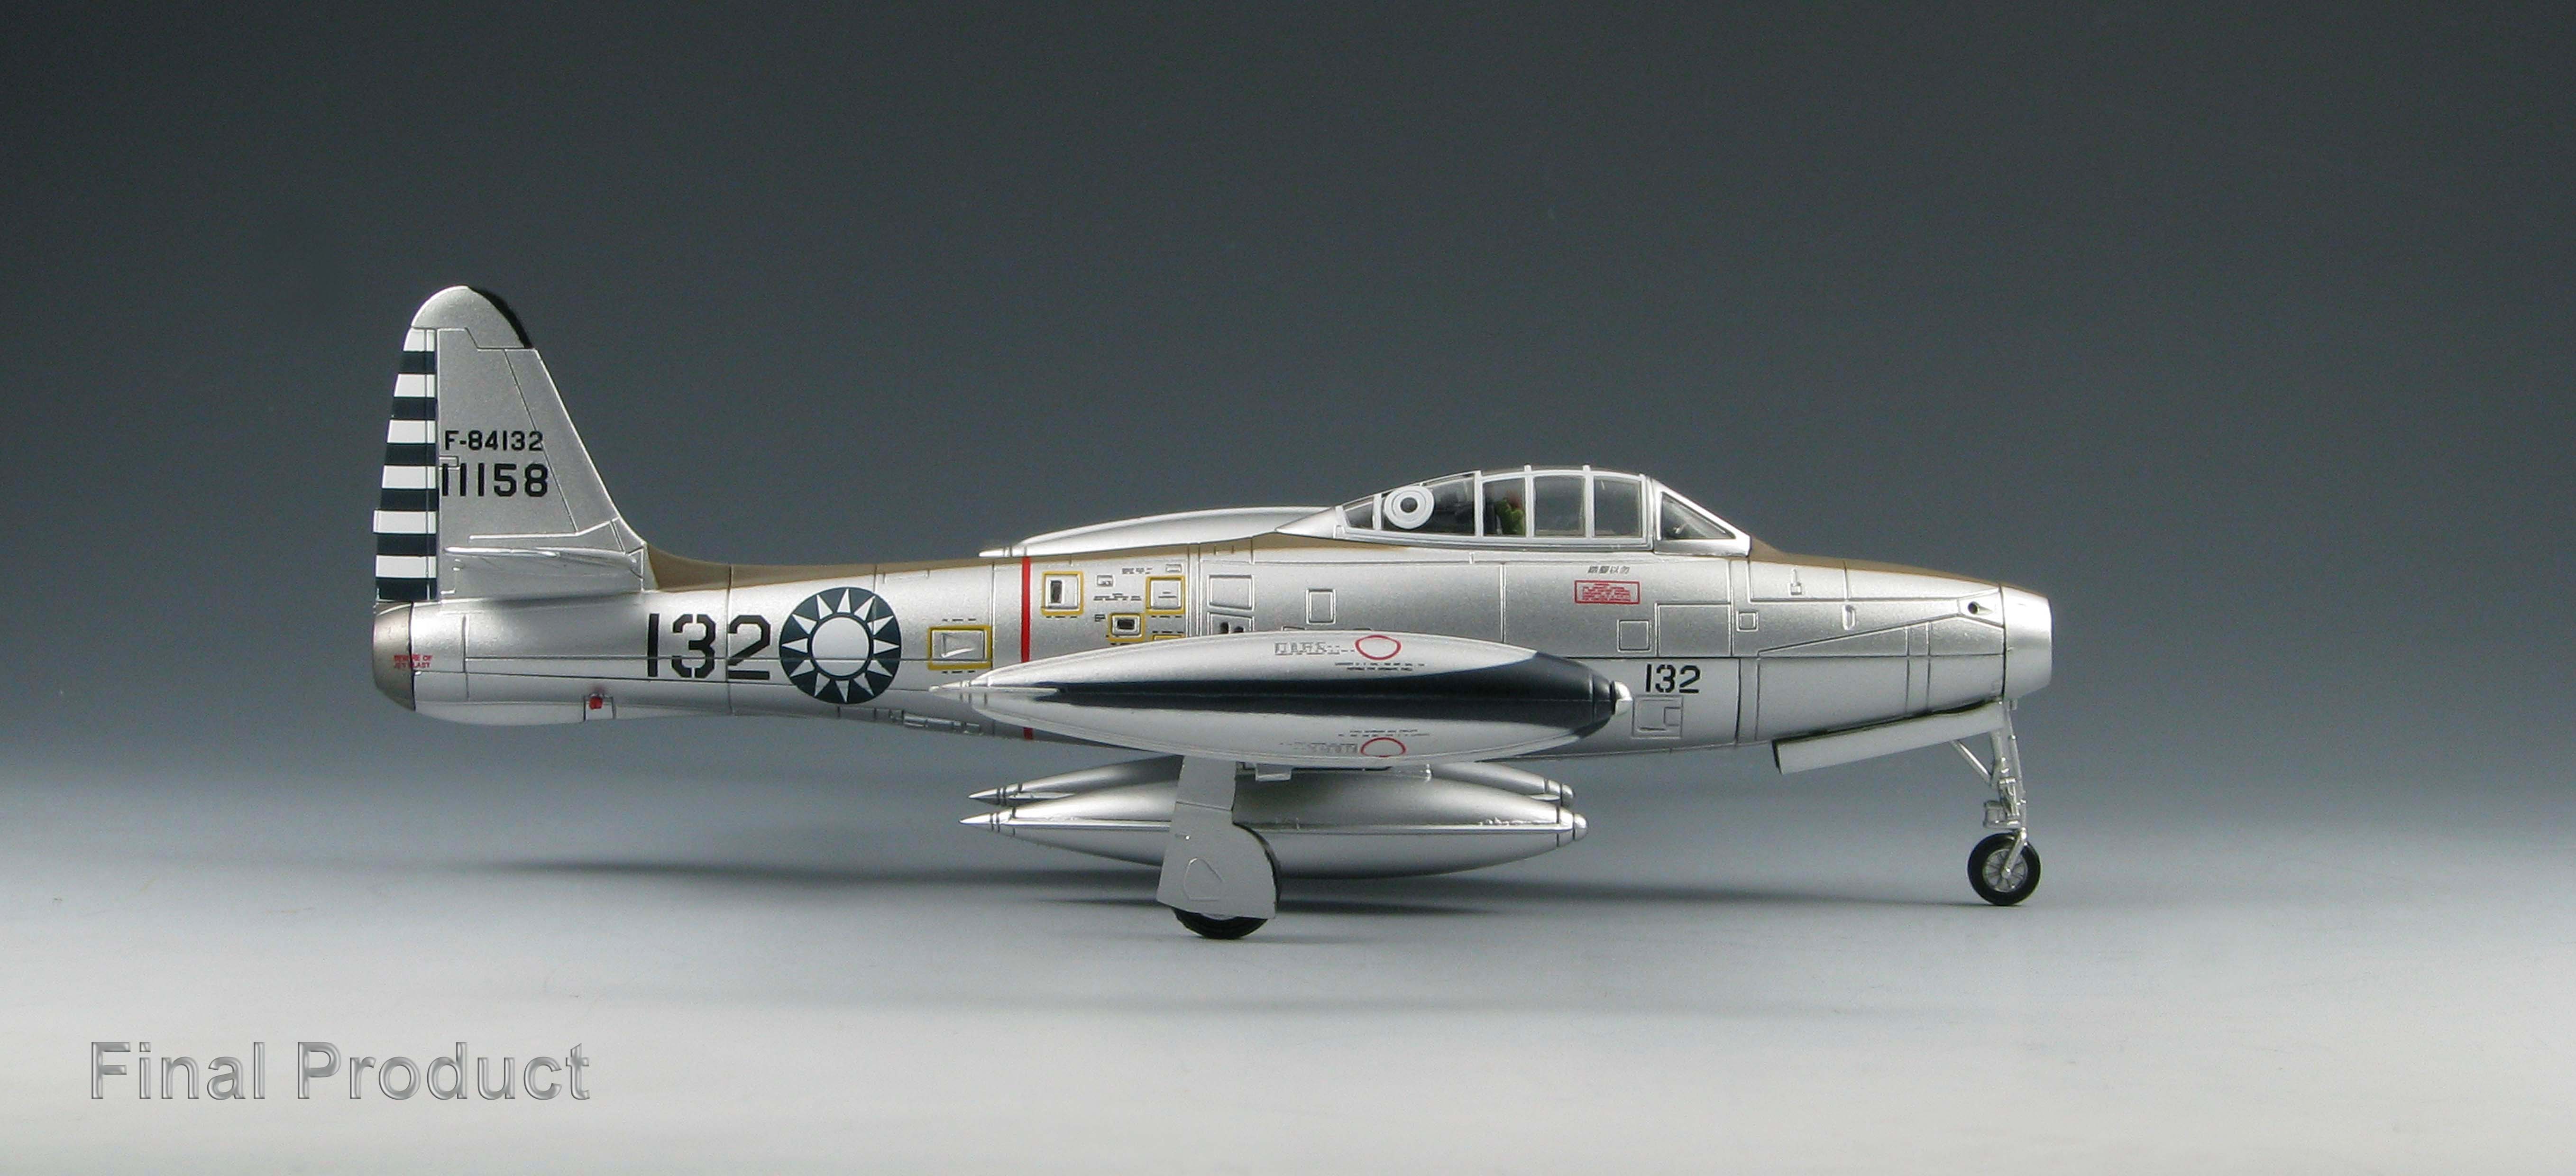 F-84G Thunderjet, 455th Tactical Fighter Wing, Republic of China 